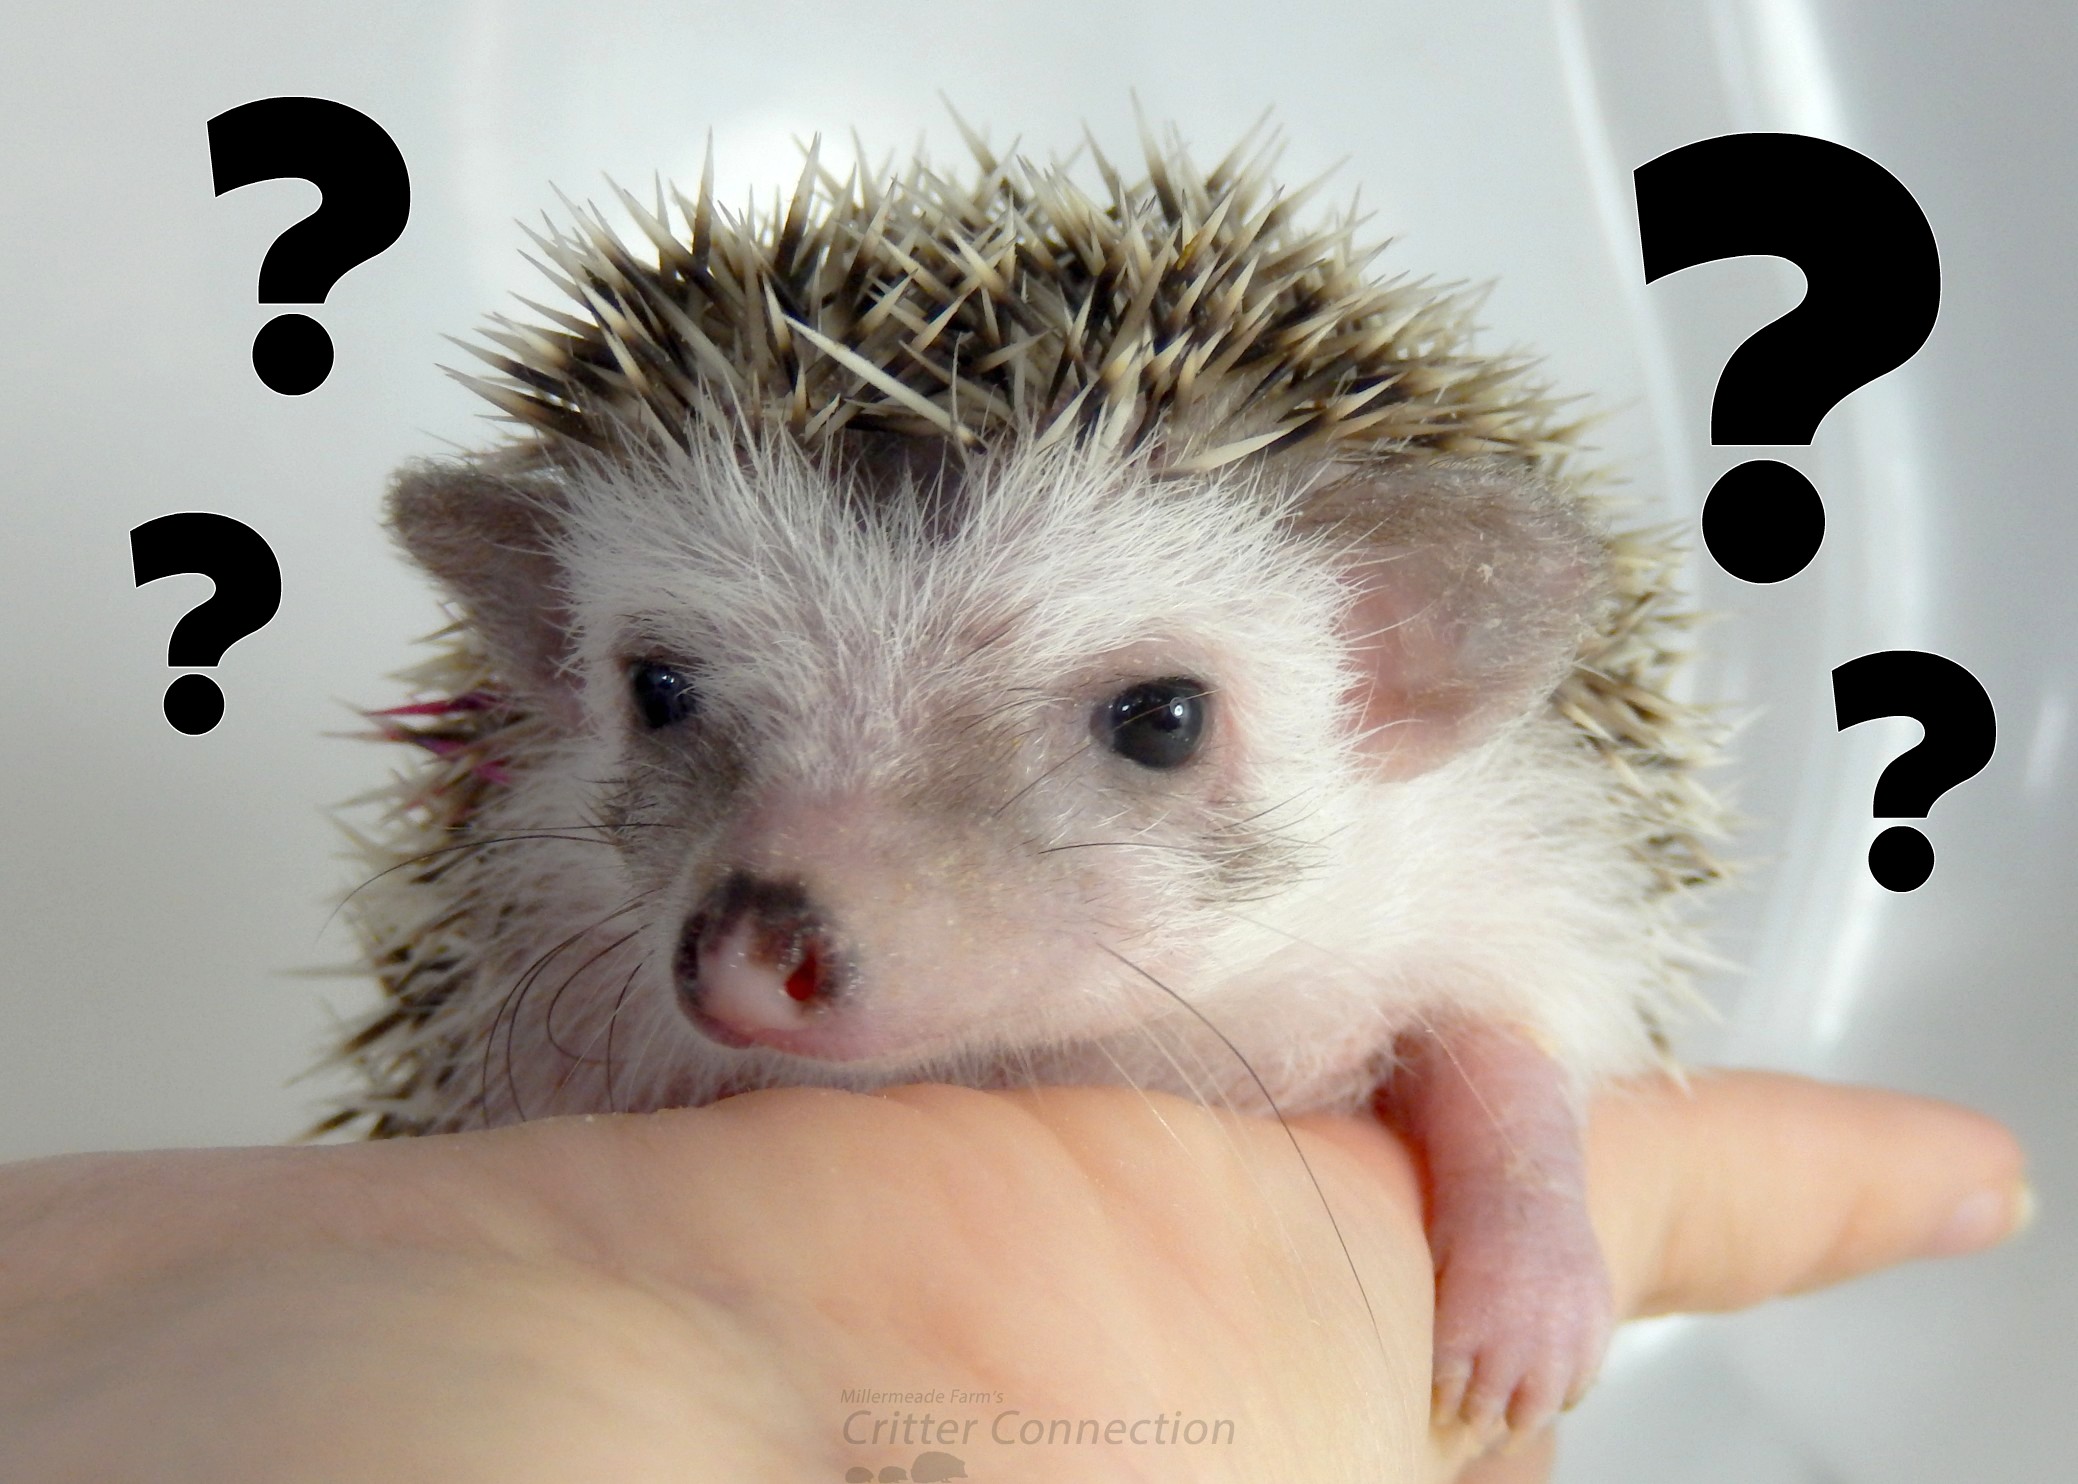 hedgehog with questions